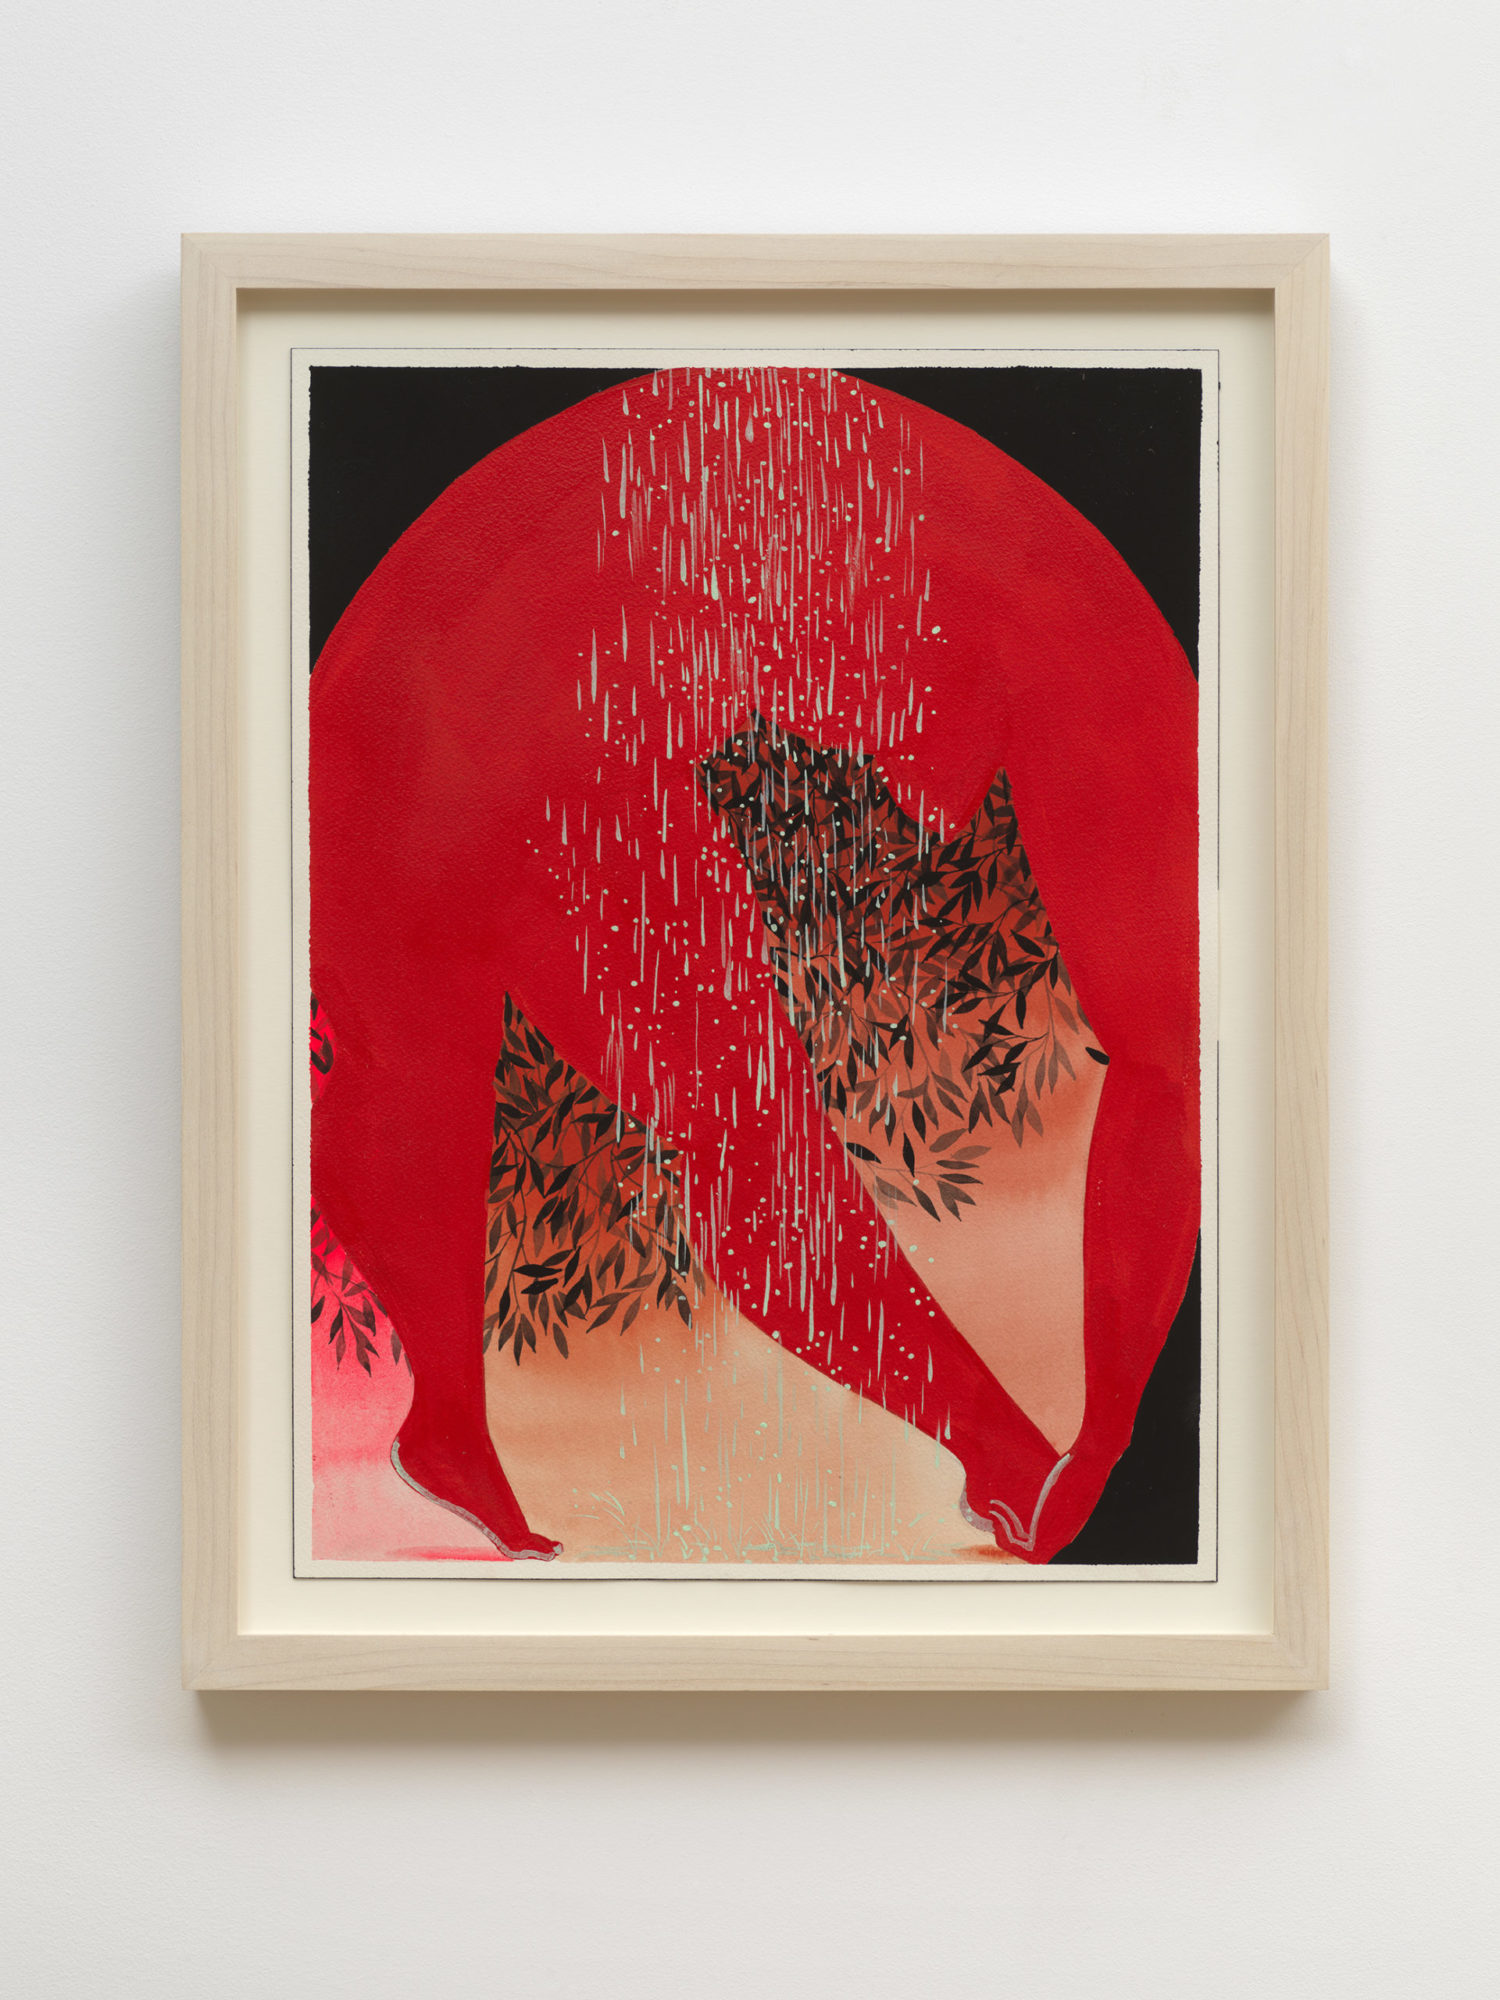 a bent red figure is touching their toes. The area around the figure that does not touch the sides of the piece are black, while the space under the figure is lighter oranges and pinks with silhouetted leaves. There is simulated white rain directly in the middle third of the composition falling vertically. Watercolor, acrylic paint, and gouache on paper.